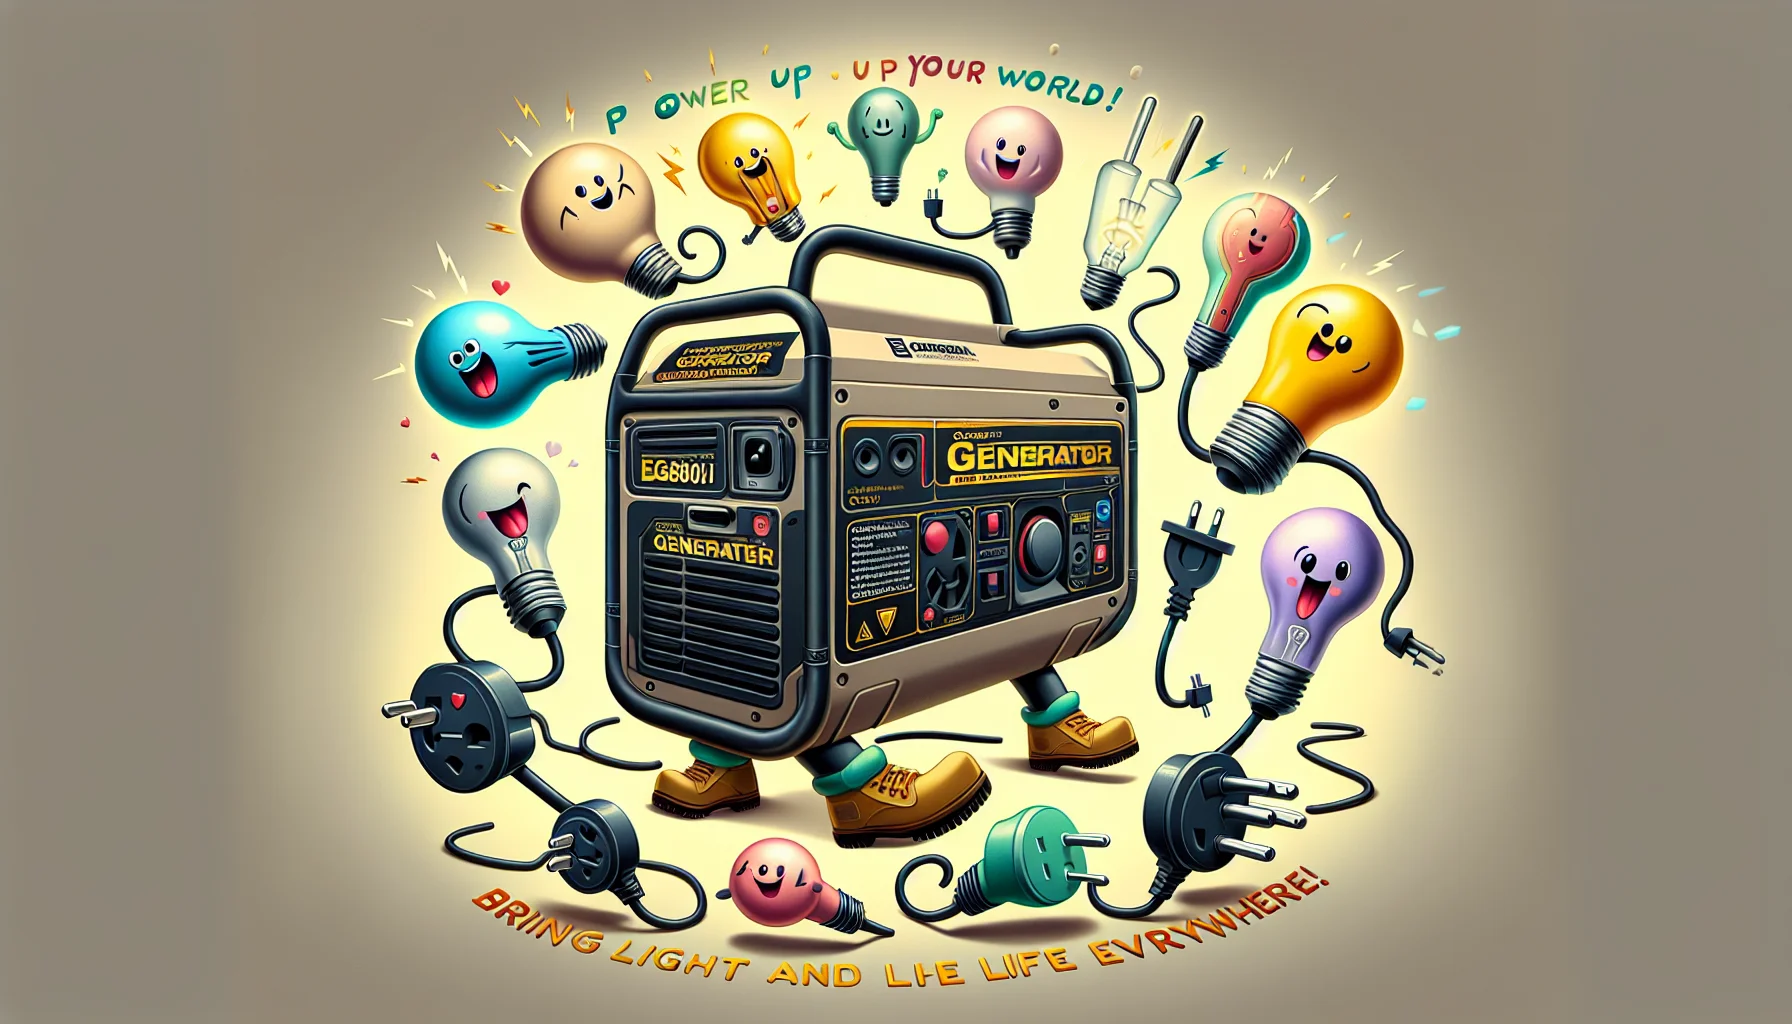 Generate an amusing and striking image of a generic portable generator modelled after the style of a EG2800i generator. It is surrounded by playful, cartoon-style light bulbs, each with their own friendly, charismatics faces. A kick line of various international power plugs, each with their unique, distinctive shapes, are dancing around the generator. The image is framed with the text 'Power up your world!' at the top and 'Bring light and life everywhere!' at the bottom, in playful, appealing, bold fonts.